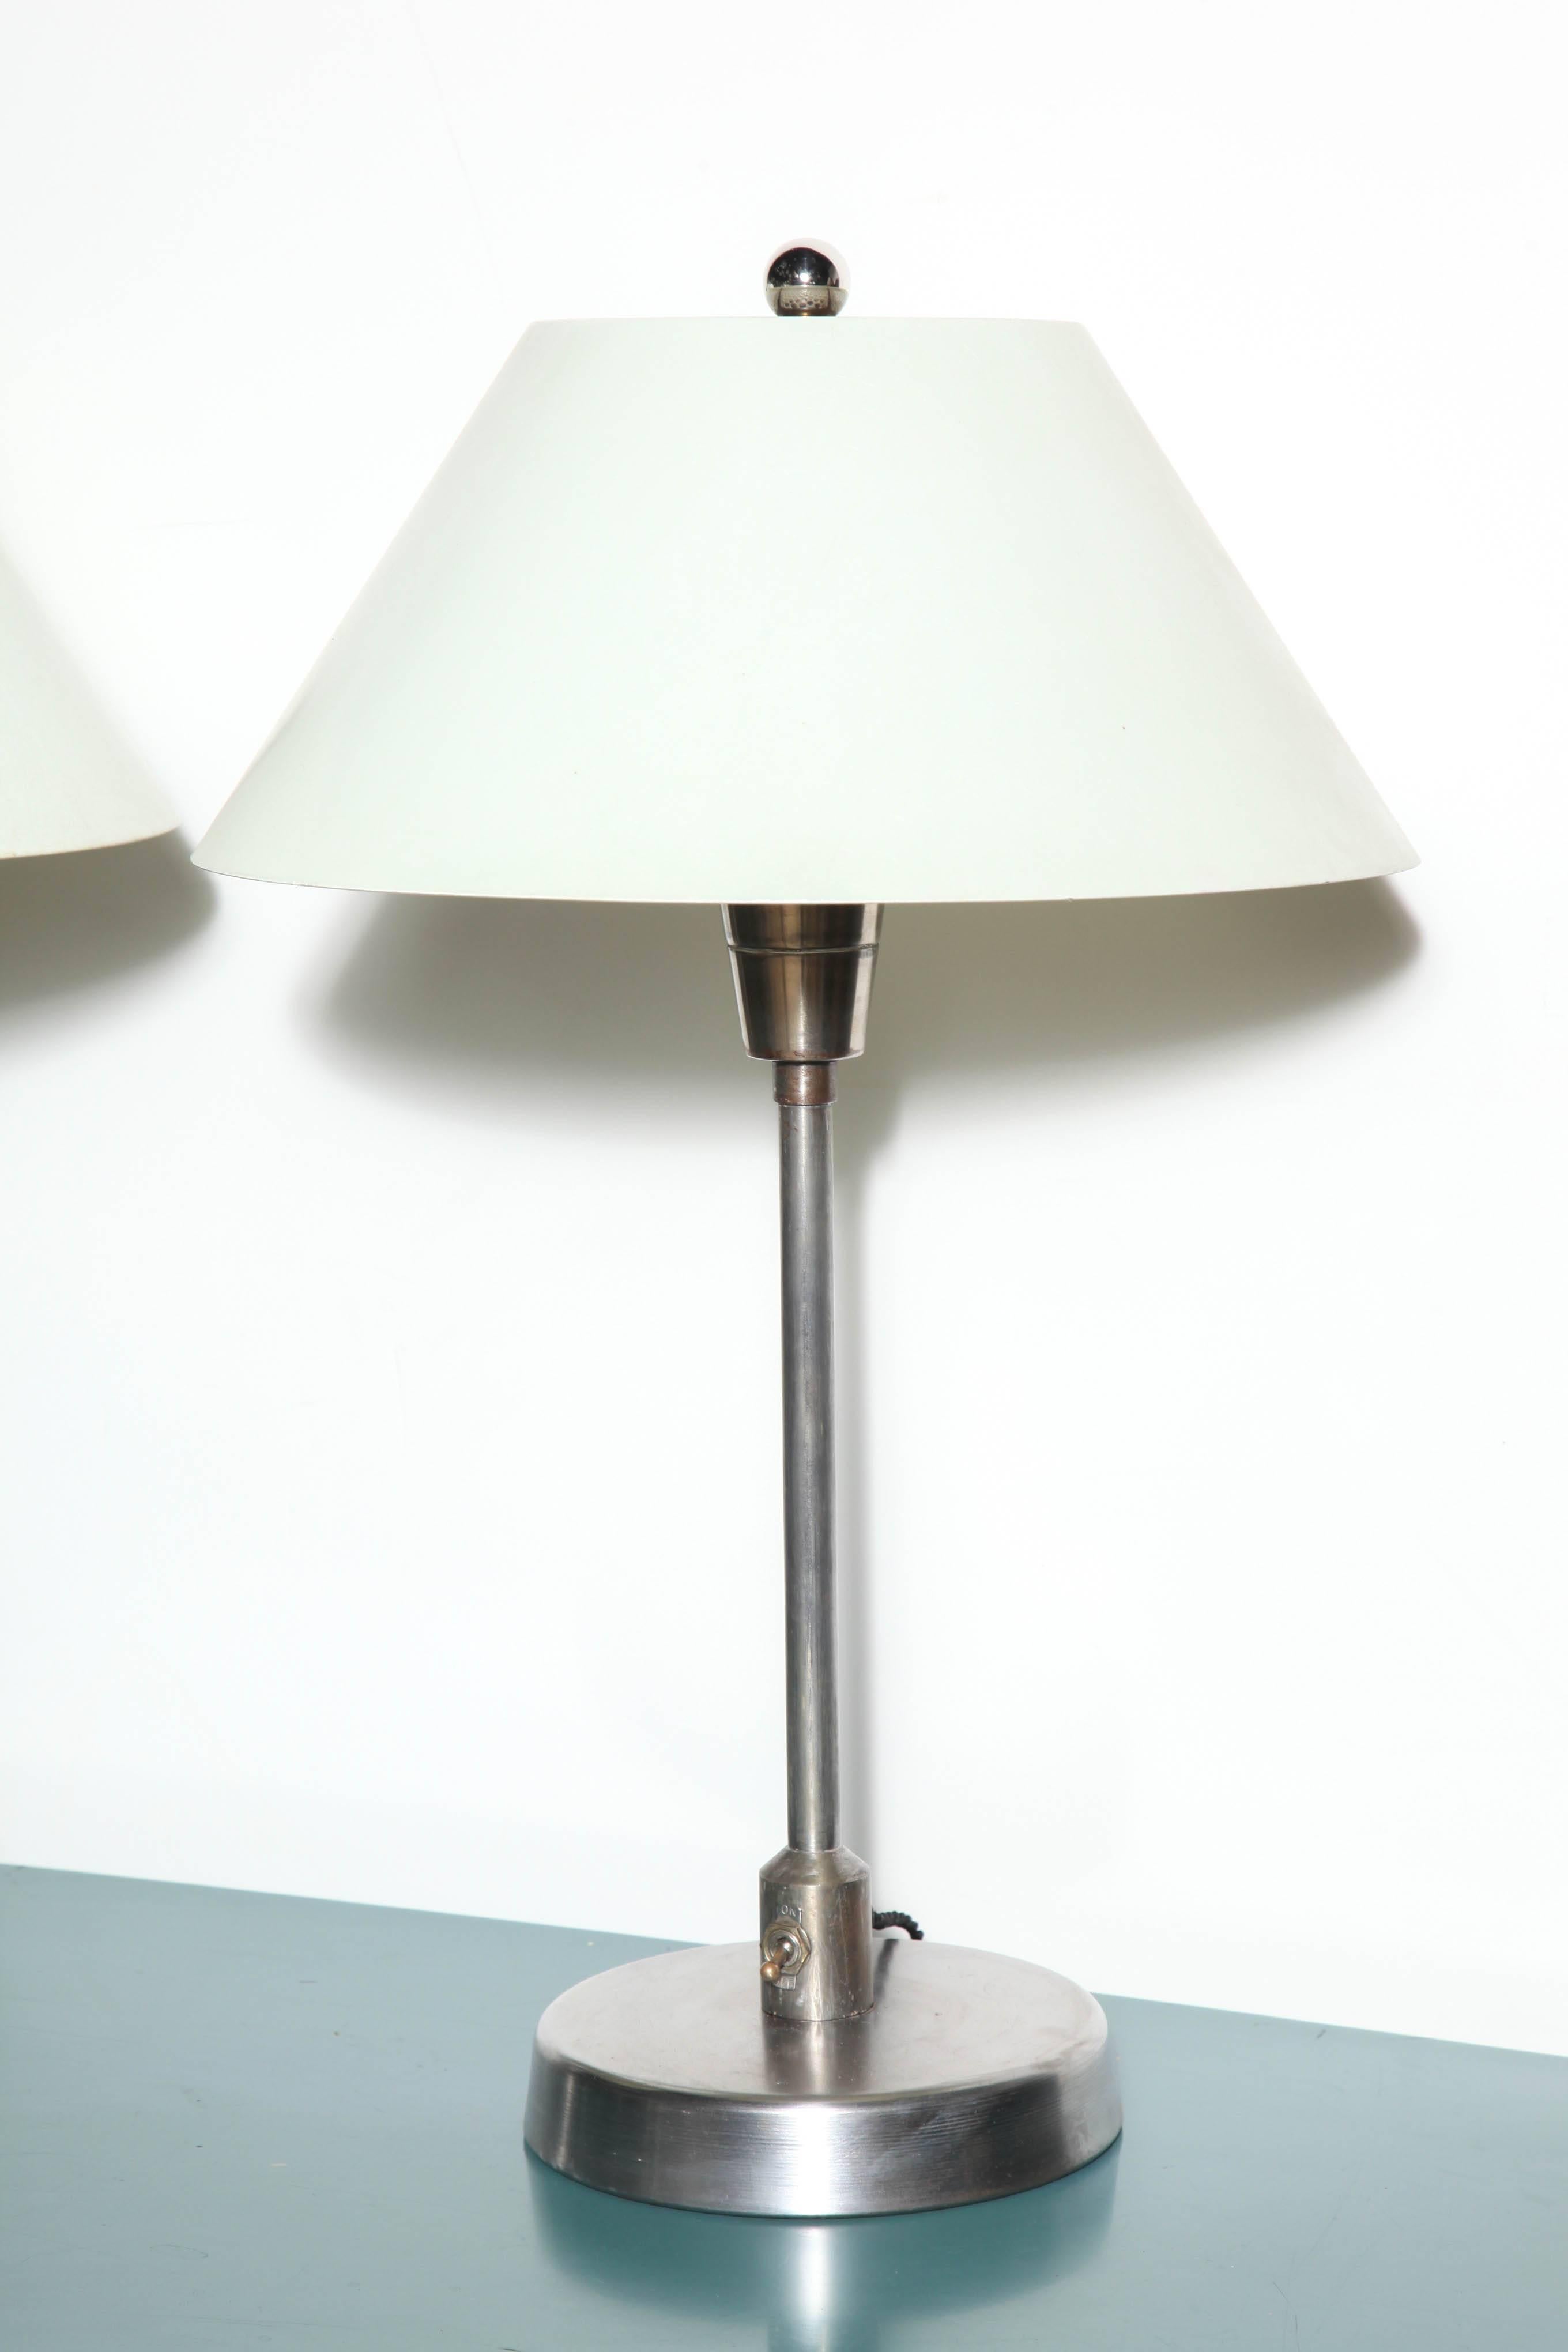 Mid-Century Modern Pair of Steel Table Lamps with Cream Fiberglass Shades, 1950's For Sale